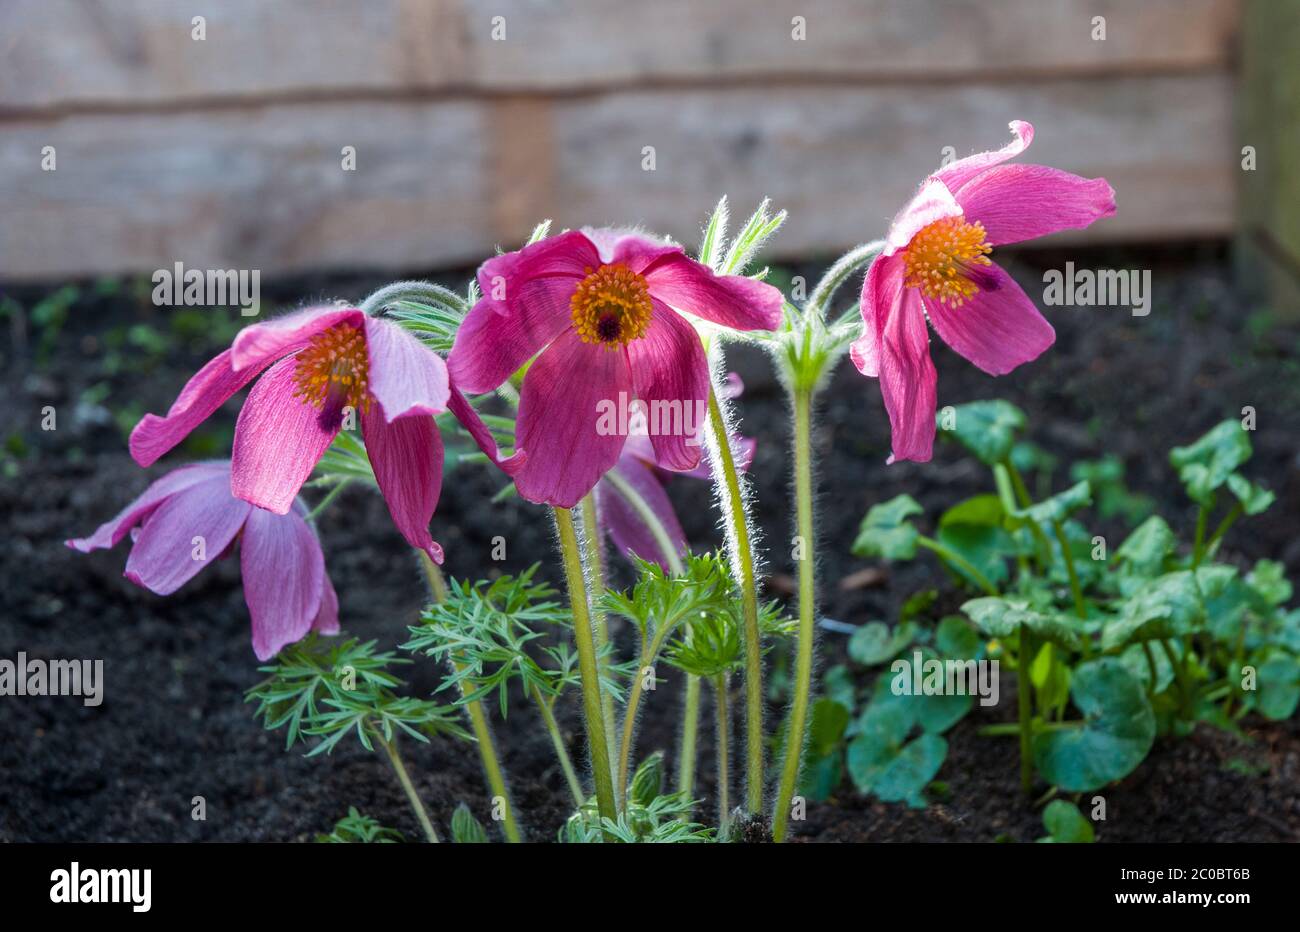 Pulsatilla vulgaris Rubra or Pasque flower with red flowers in early spring. A clump forming diciduous perennial that is fully hardy. Stock Photo